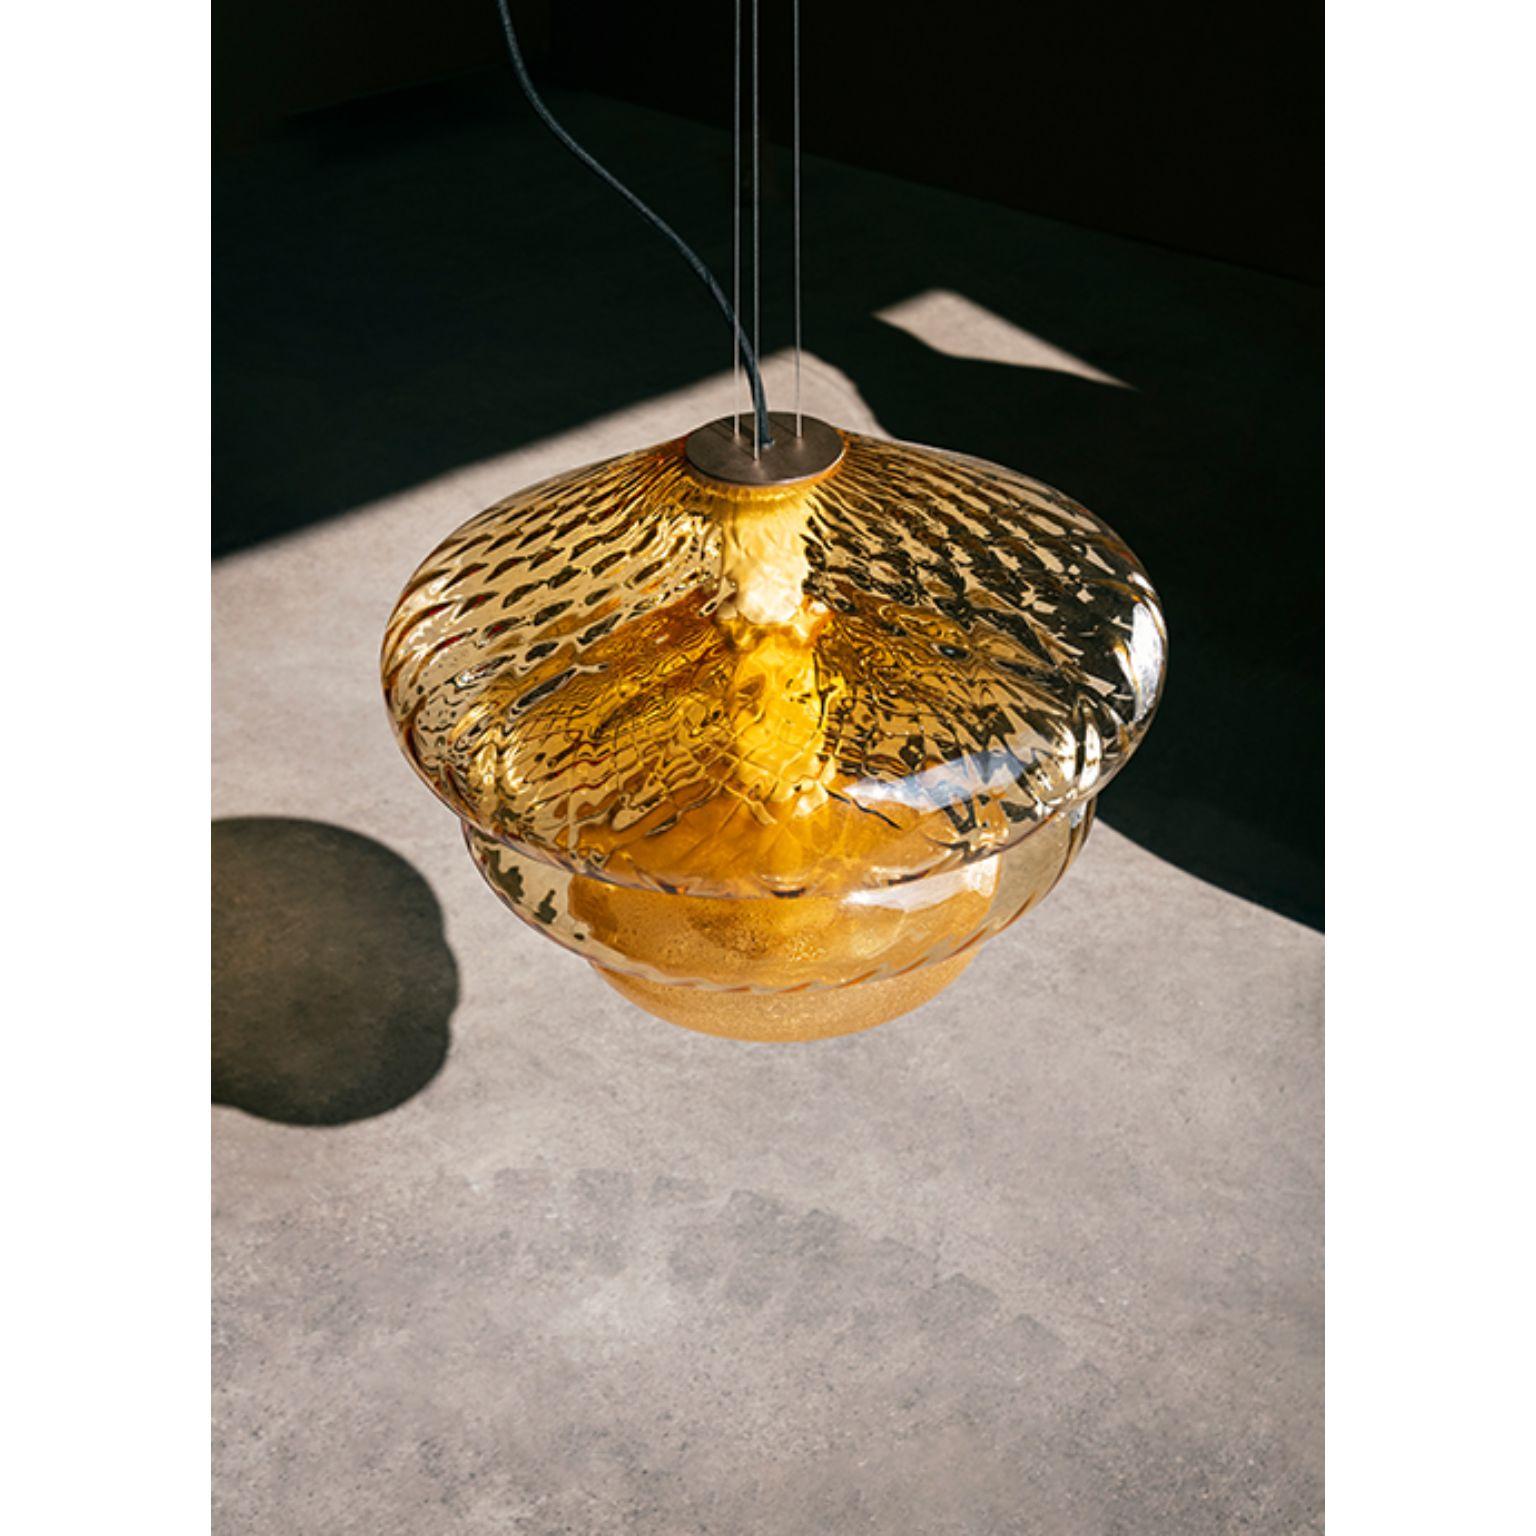 Tima pendant light by Luca Nichetto
Materials: Shade: Clear/Grigio Kaiser/amber mouth blown glass
 Structure: Bronze satin, black chrome, glass
Dimensions: W 44.2 x D 44.2 x H 34 cm

In the roundness of their sinuous bodies and surprising